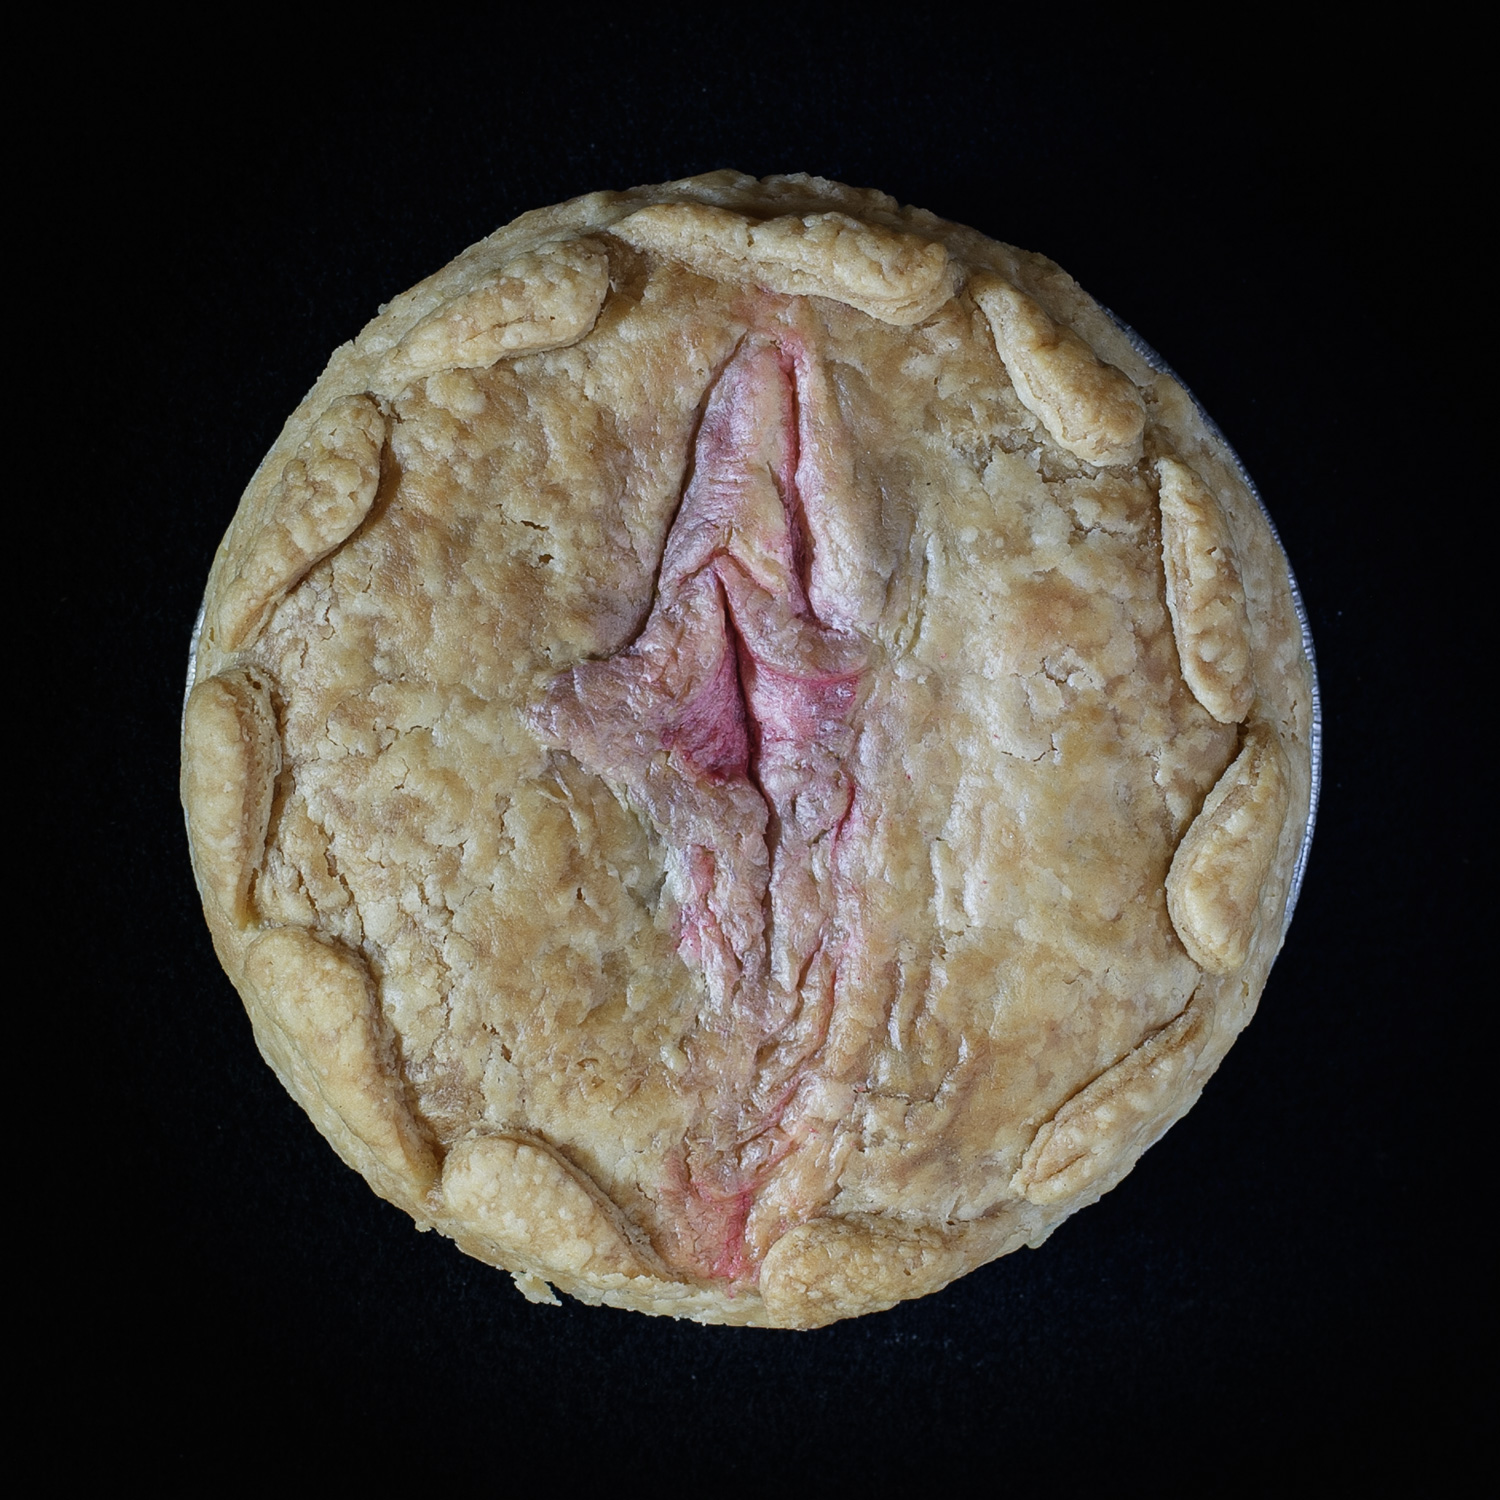 Baked pie on a black background. The pie art is made to look like a realist human vulva.